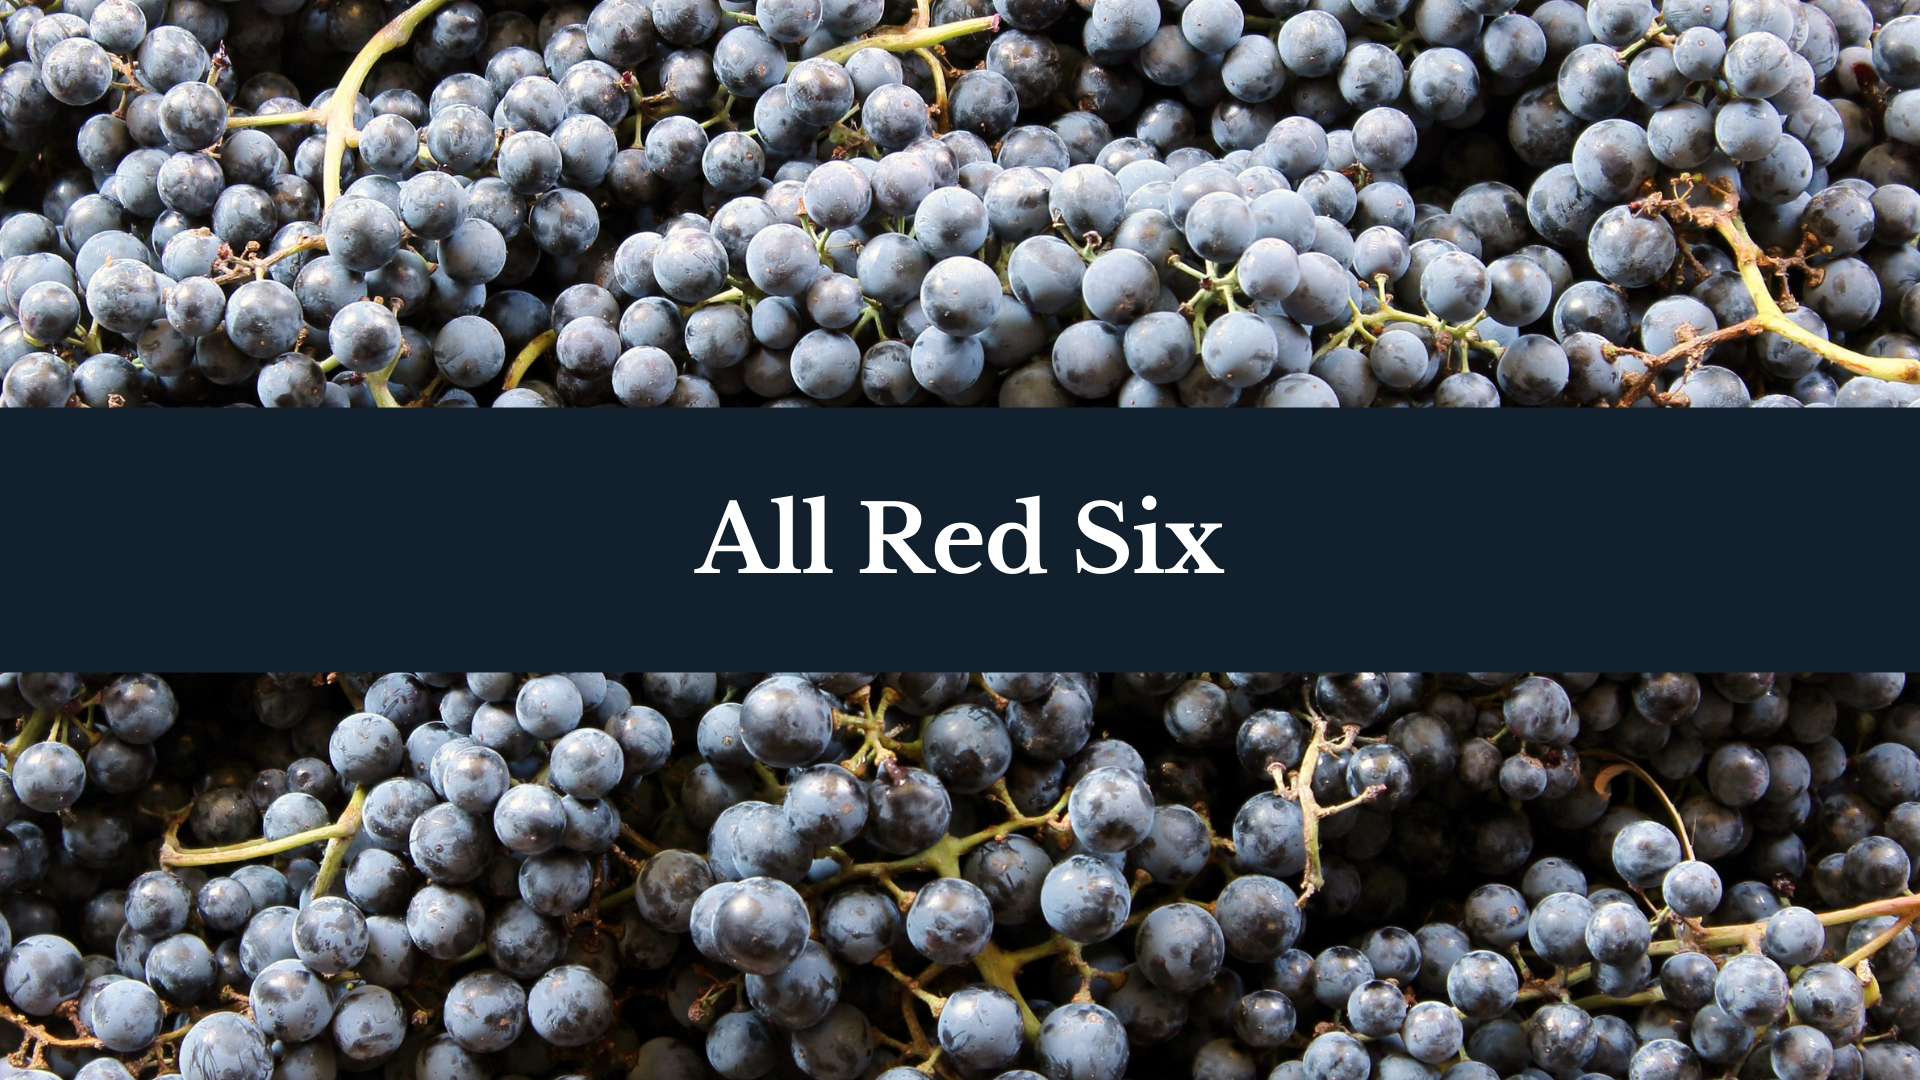 All Red Six Wine Club Subscription